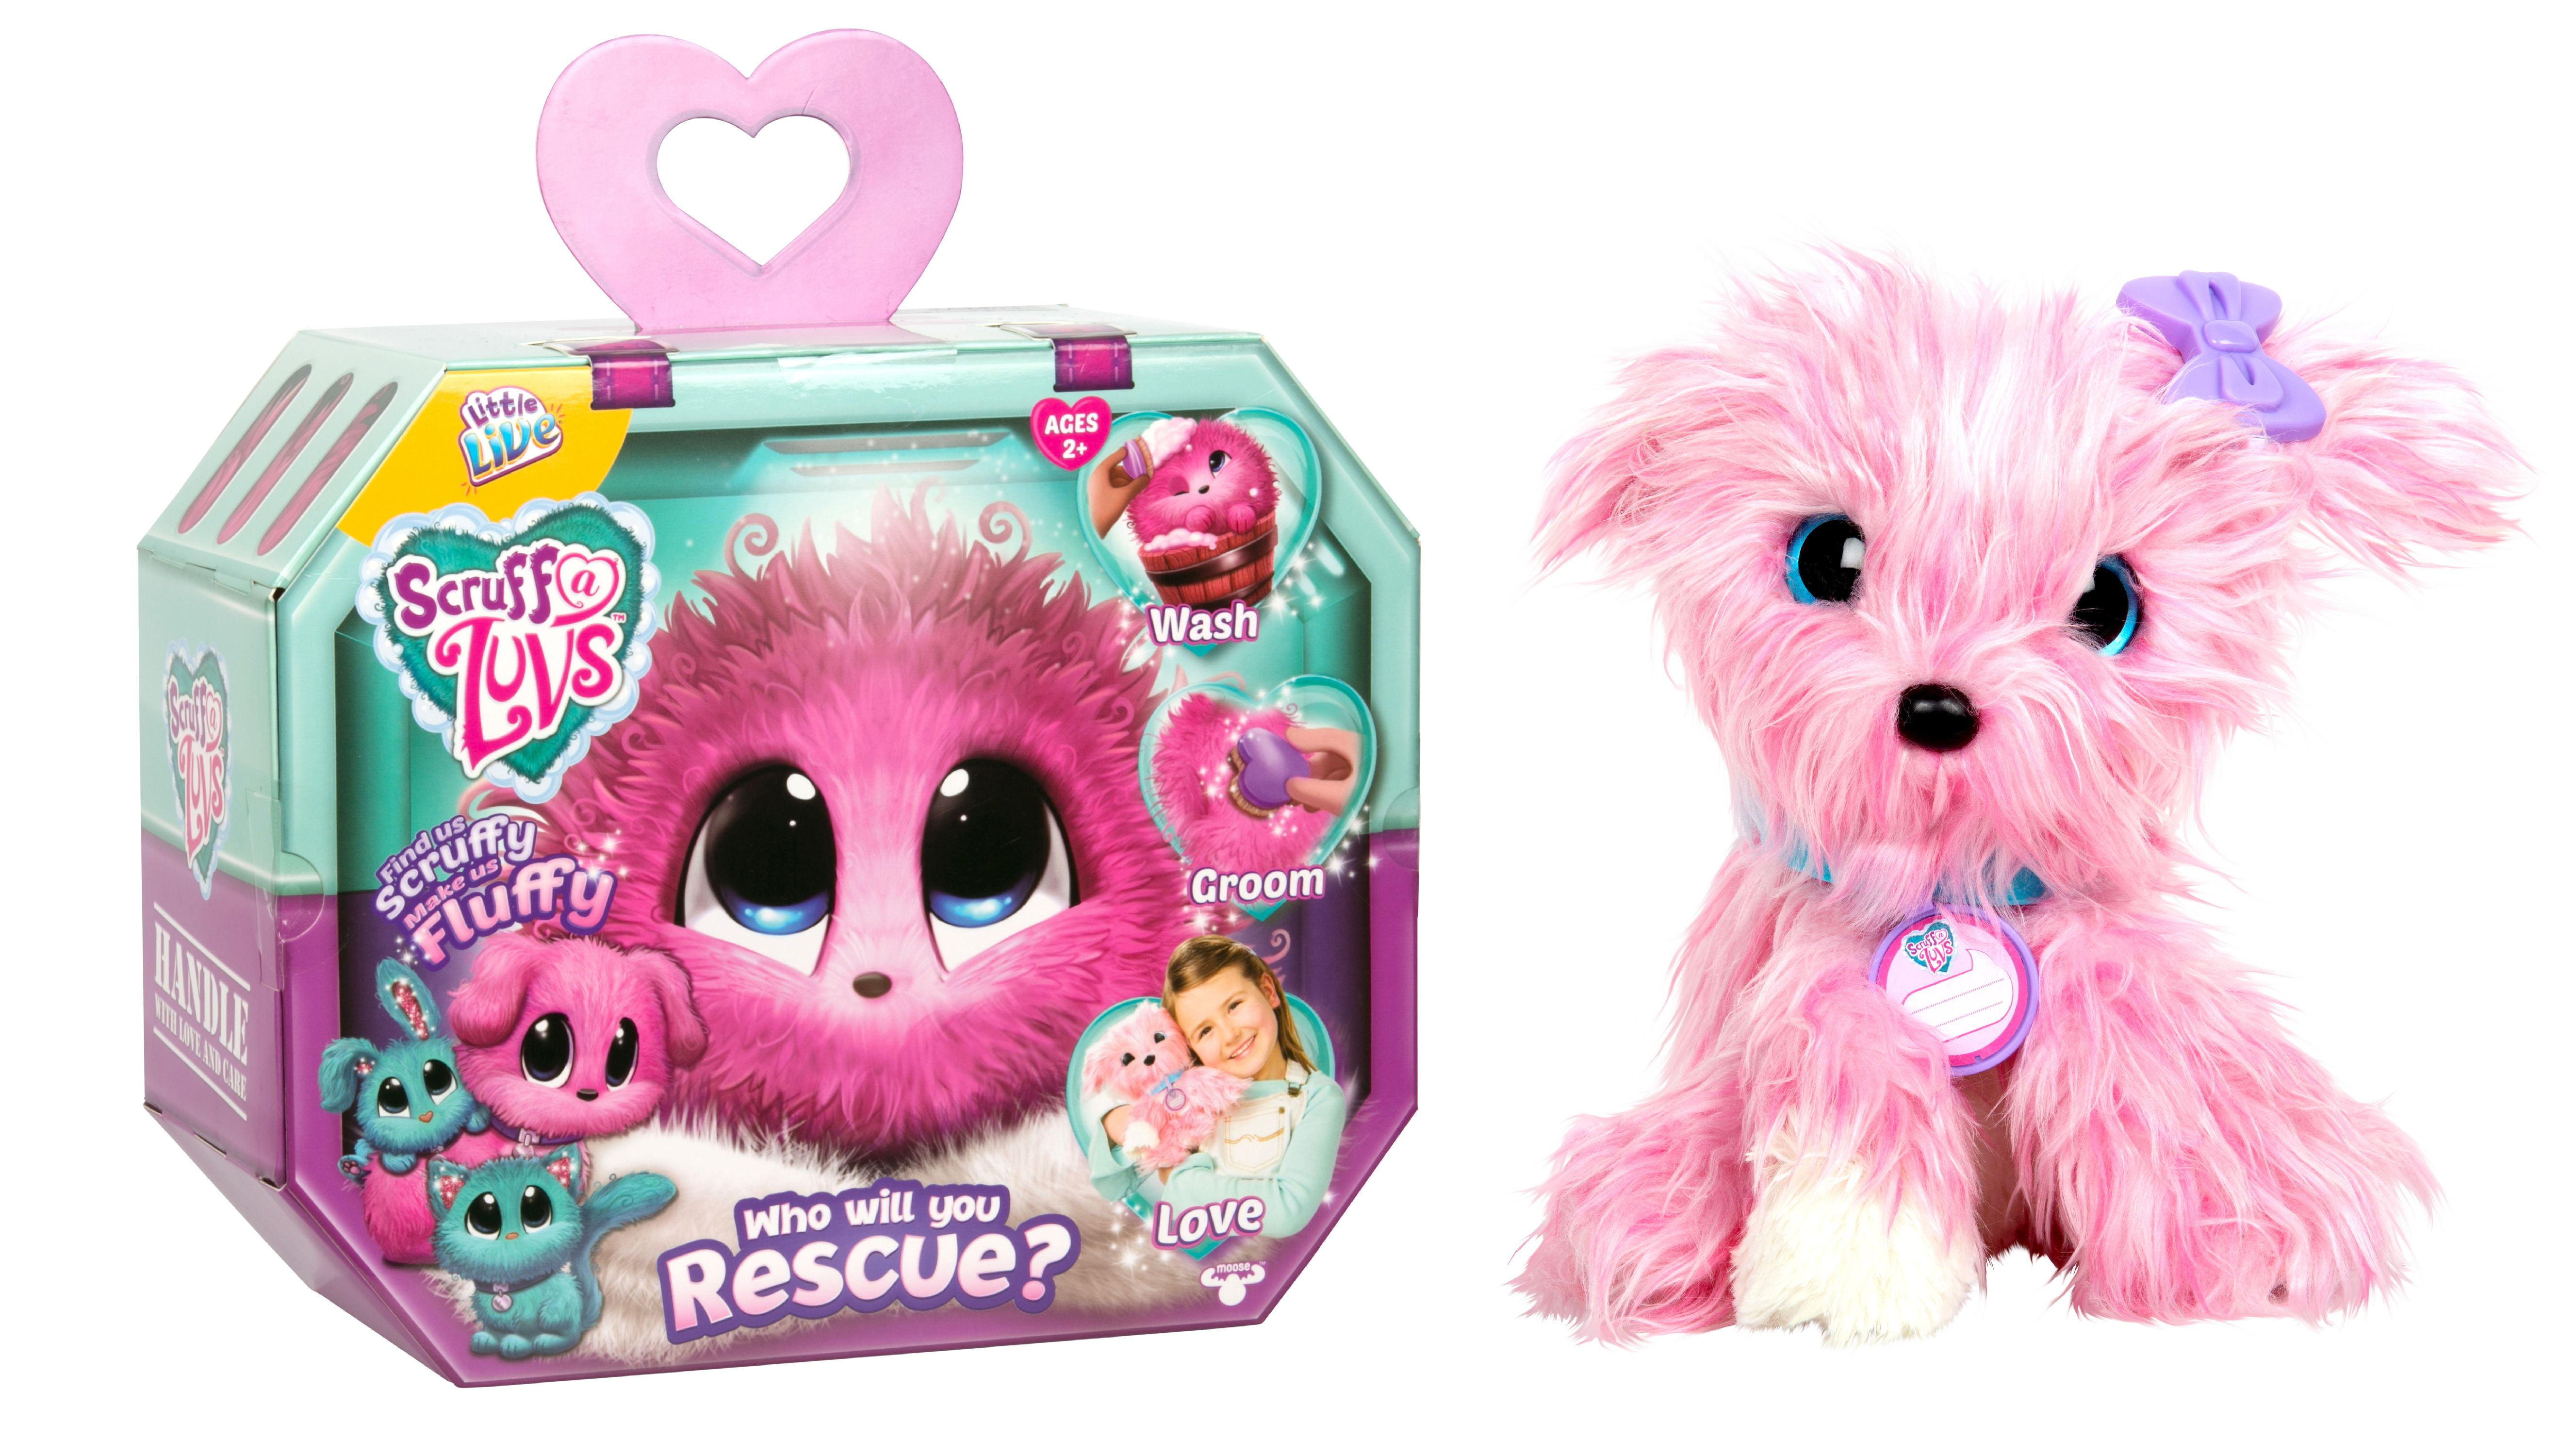 30015 for sale online LITTLE LIVE PETS Scruff-A-Luvs Family Pack 